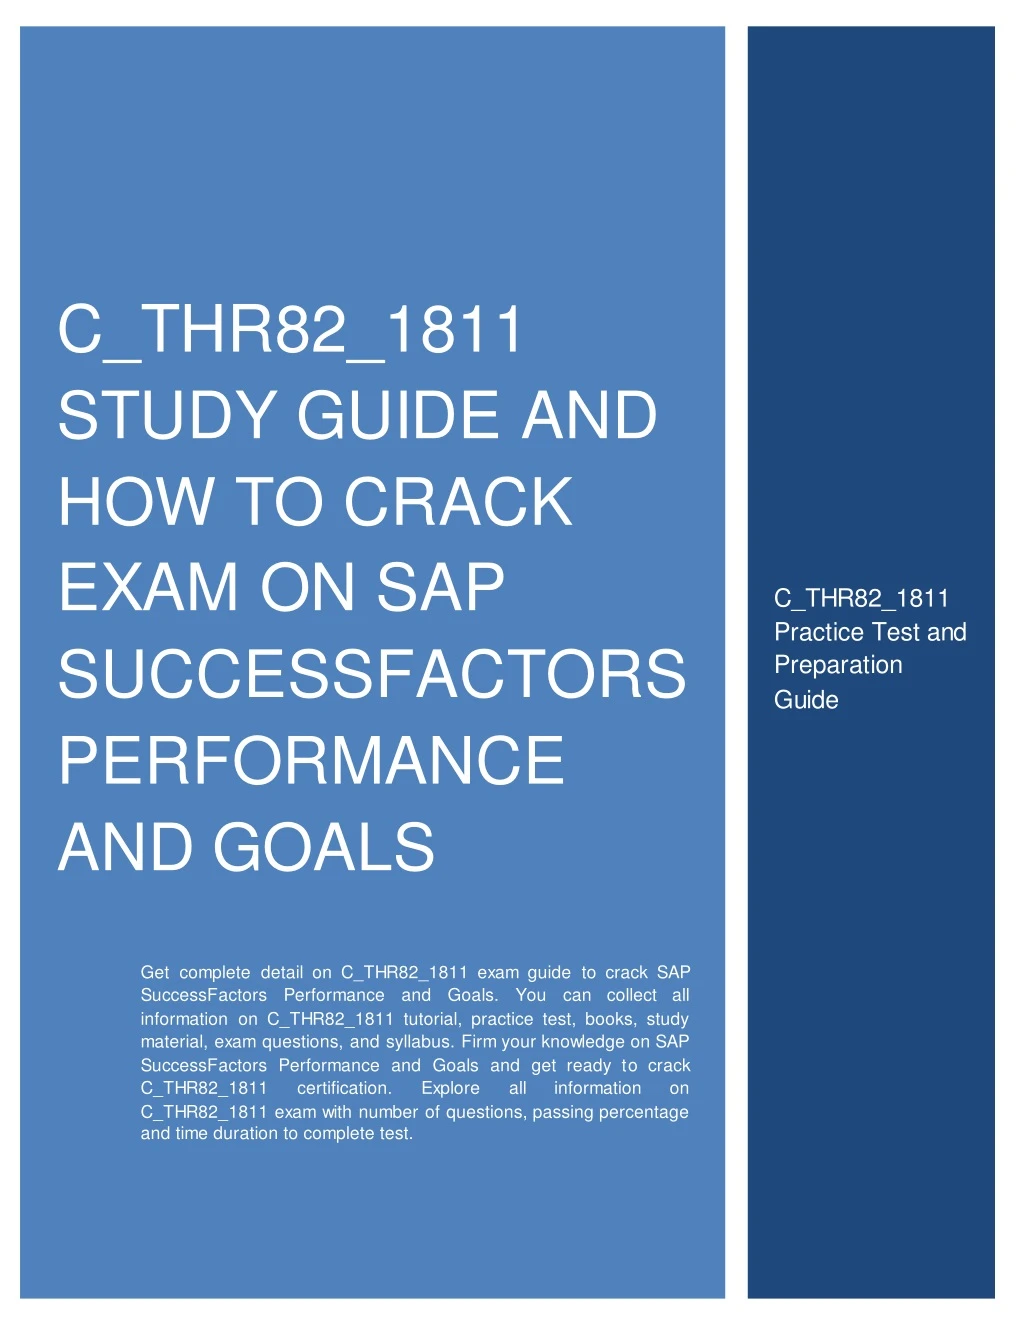 c thr82 1811 study guide and how to crack exam